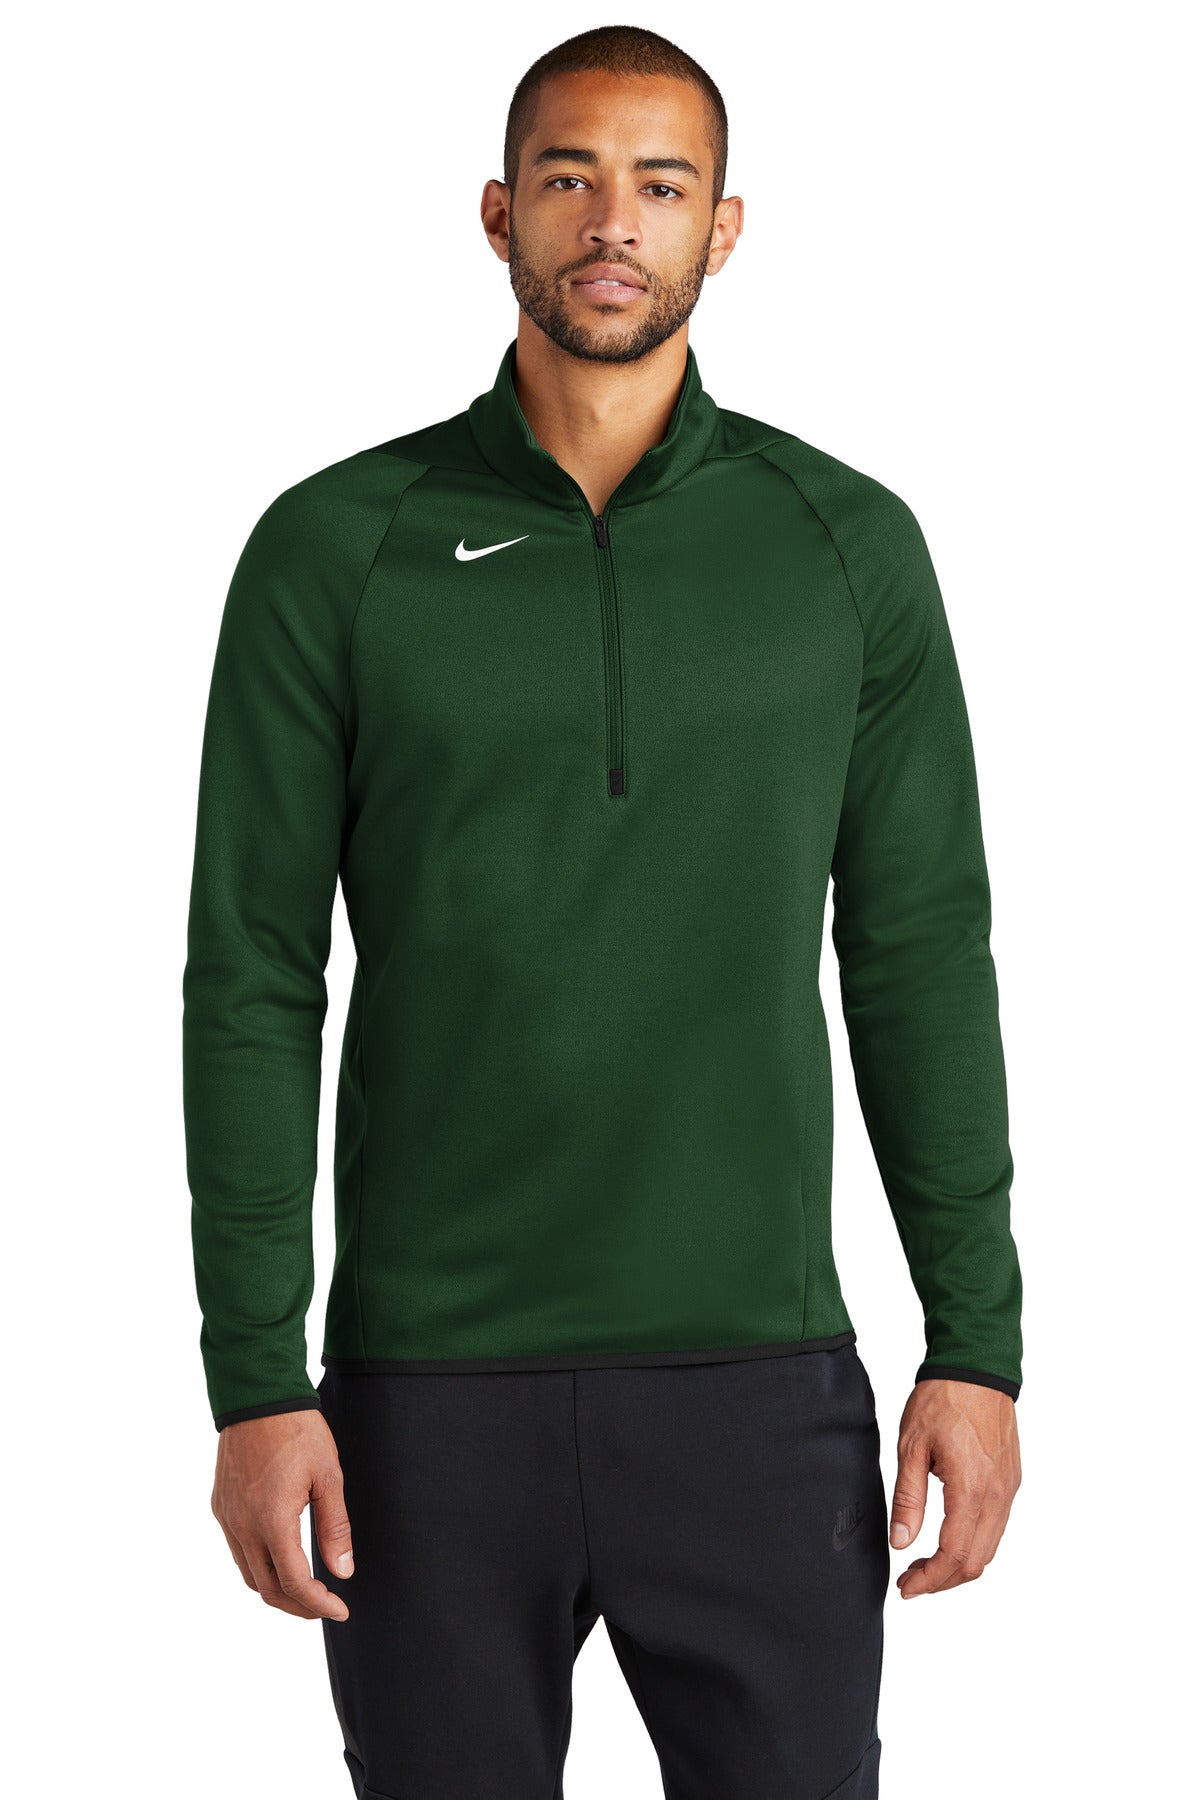 LIMITED EDITION Nike Therma-FIT 1/4-Zip Fleece CN9492 - DFW Impression